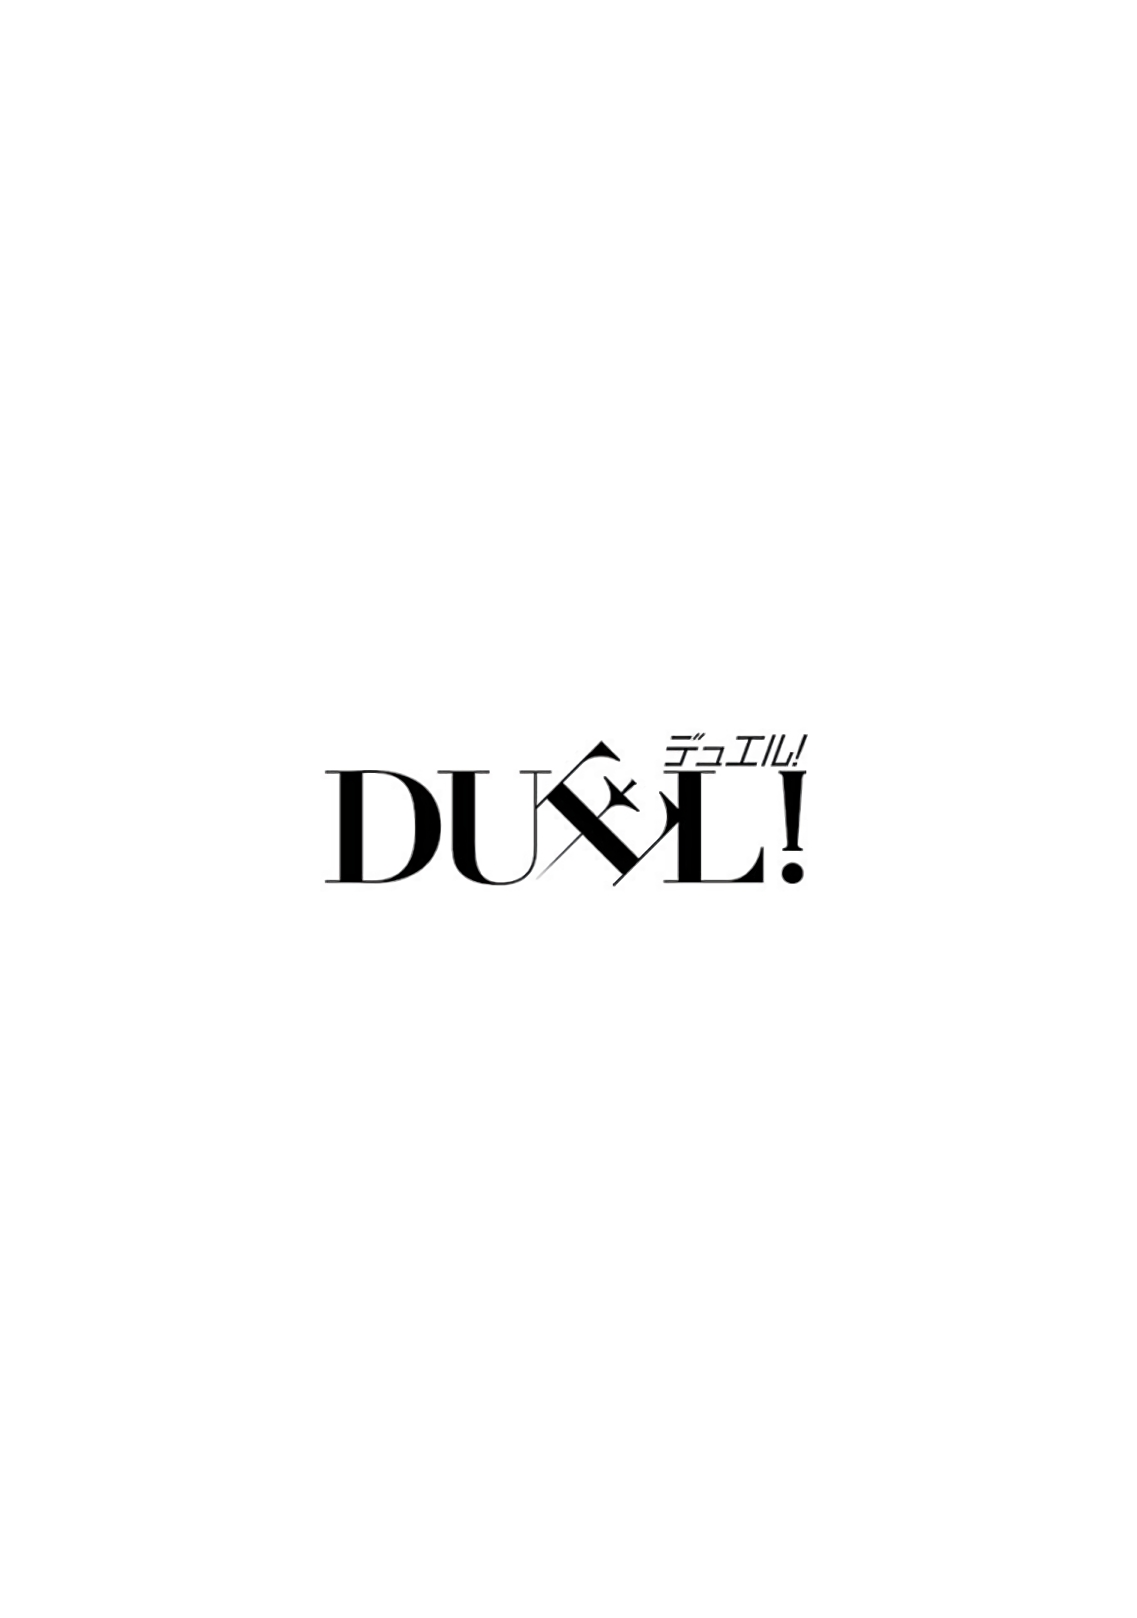 Duel! Vol. 1 Ch. 7 Turn over